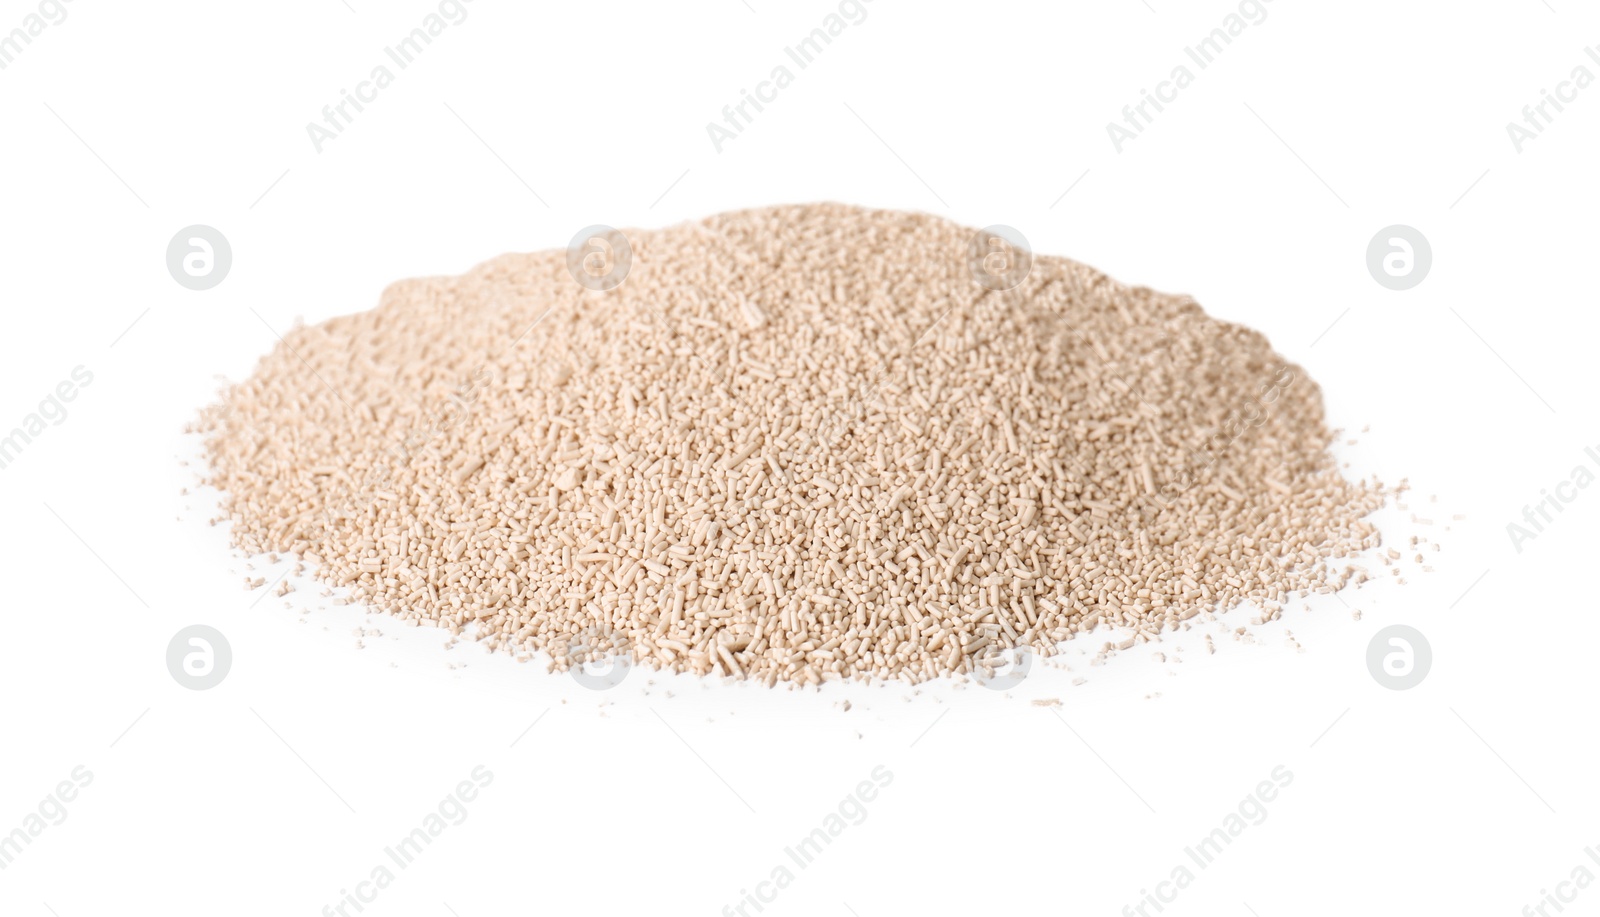 Photo of Heap of active dry yeast isolated on white